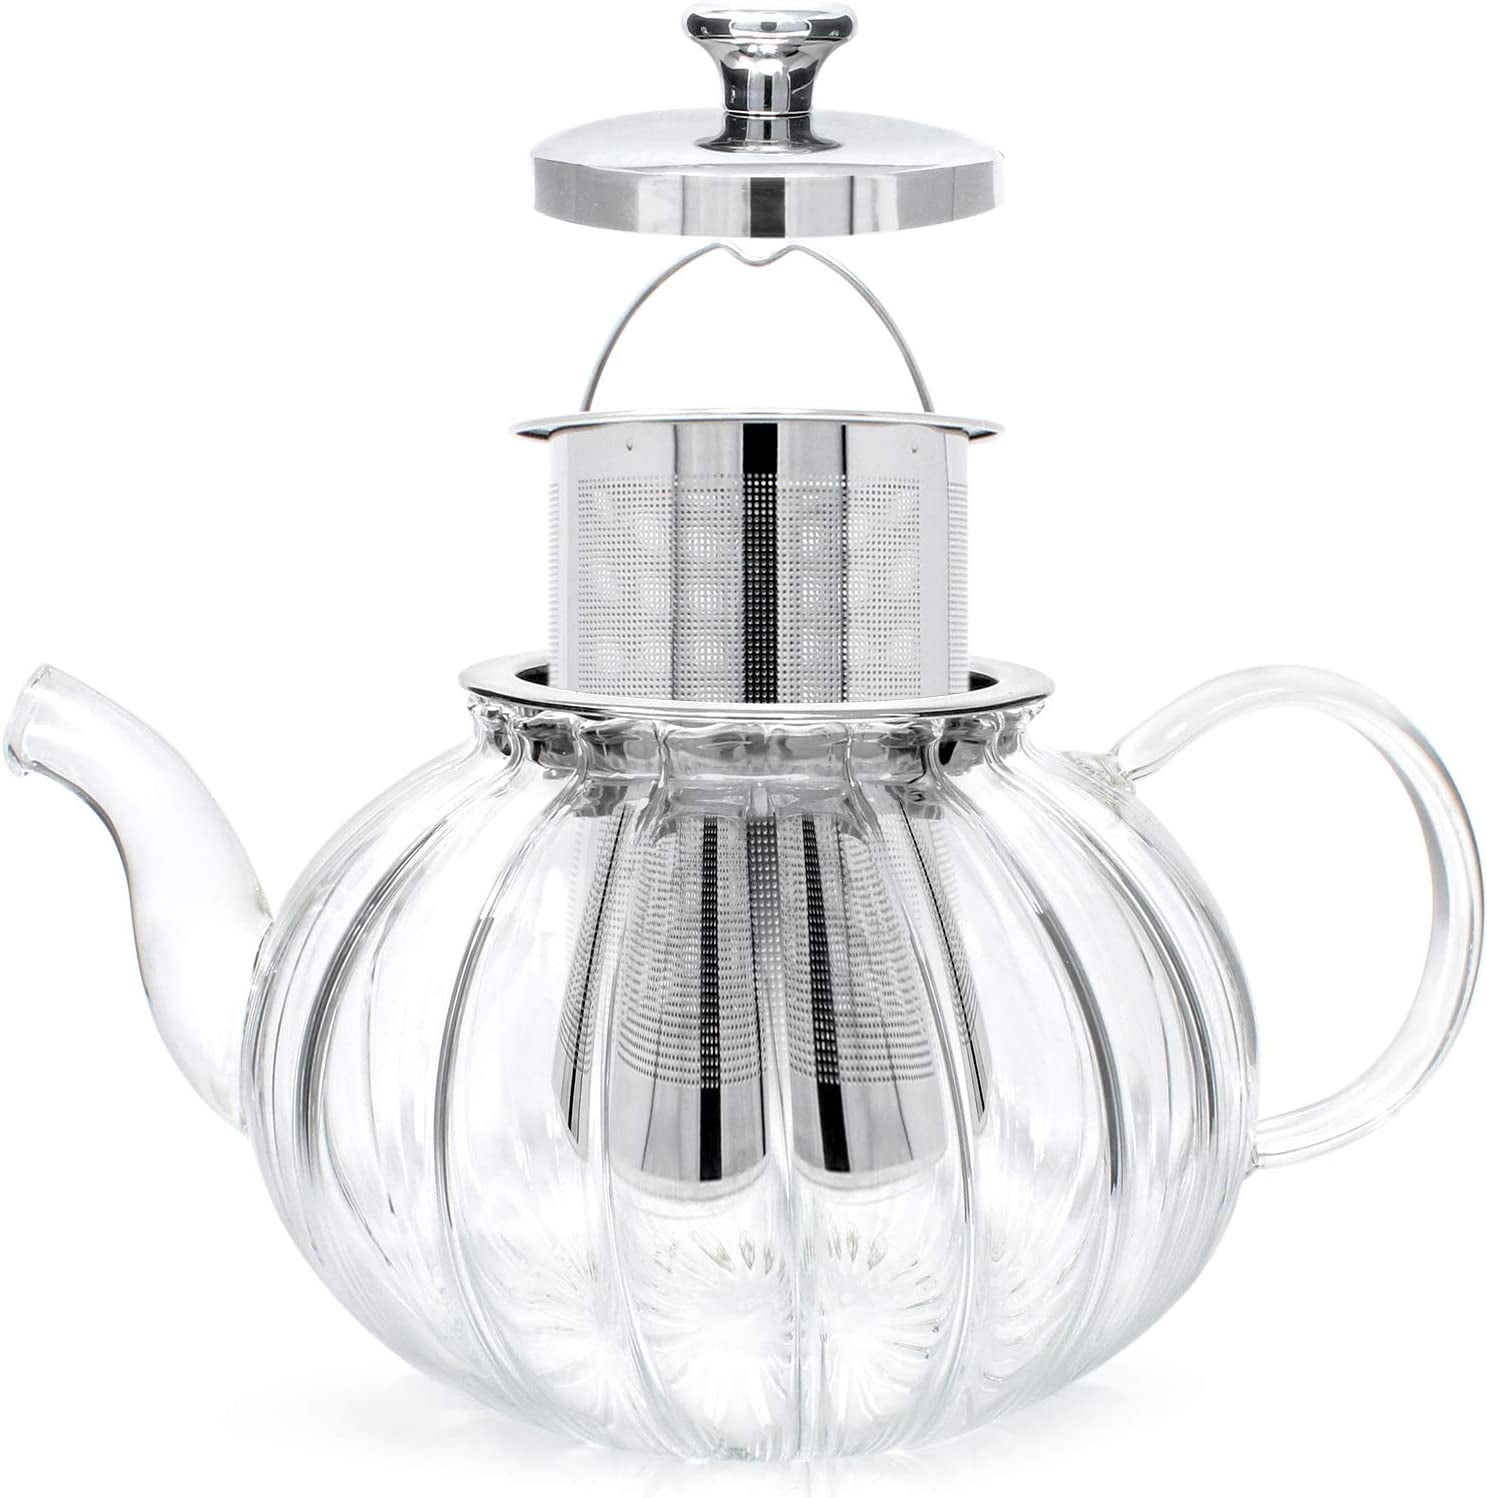  Teabloom All-in-One Glass Teapot and Tea Kettle – Heatproof  Borosilicate Glass Tea Maker with Removable Stainless Steel Loose Tea  Infuser – Classica Stovetop Tea Pot (40 oz / 1200 ml) 